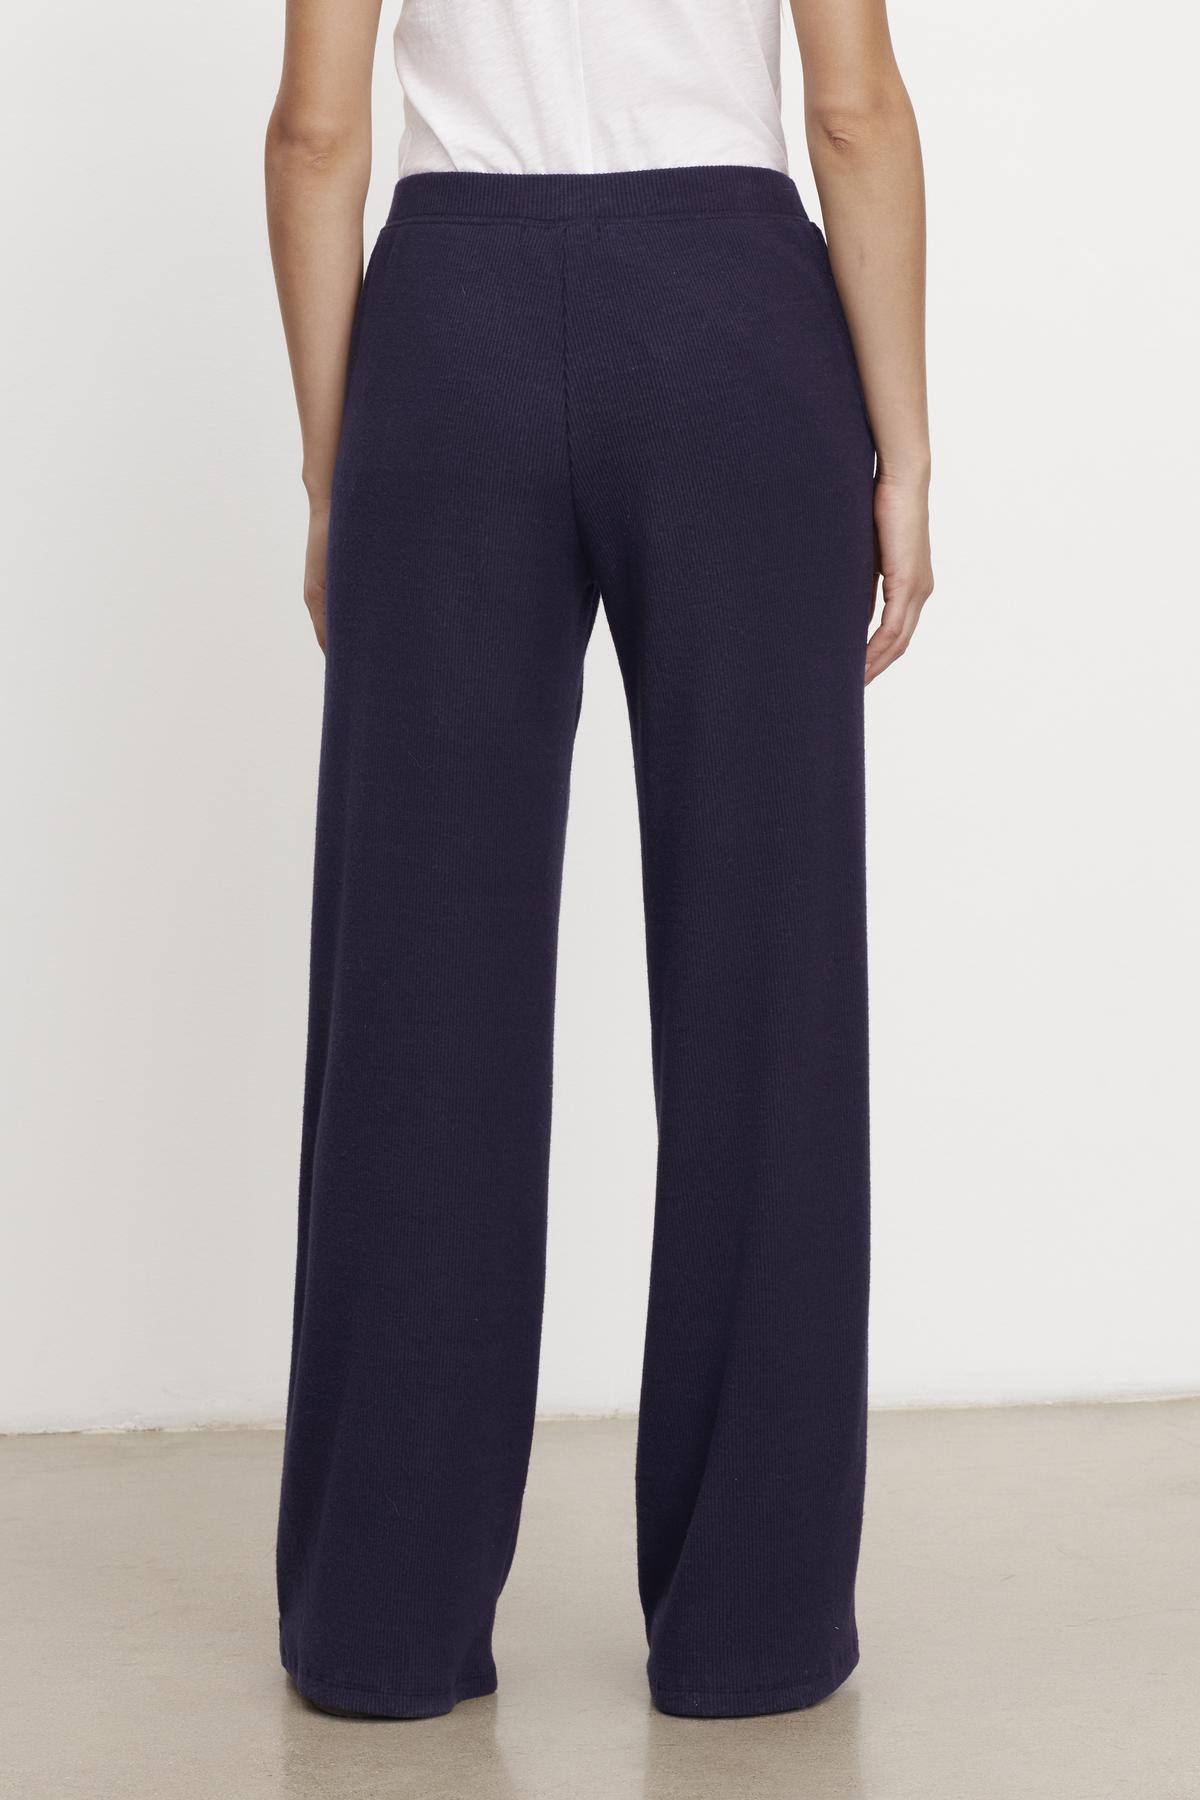 The back view of a woman wearing Velvet by Graham & Spencer's KACIE BRUSHED RIB PANT.-35701975548097